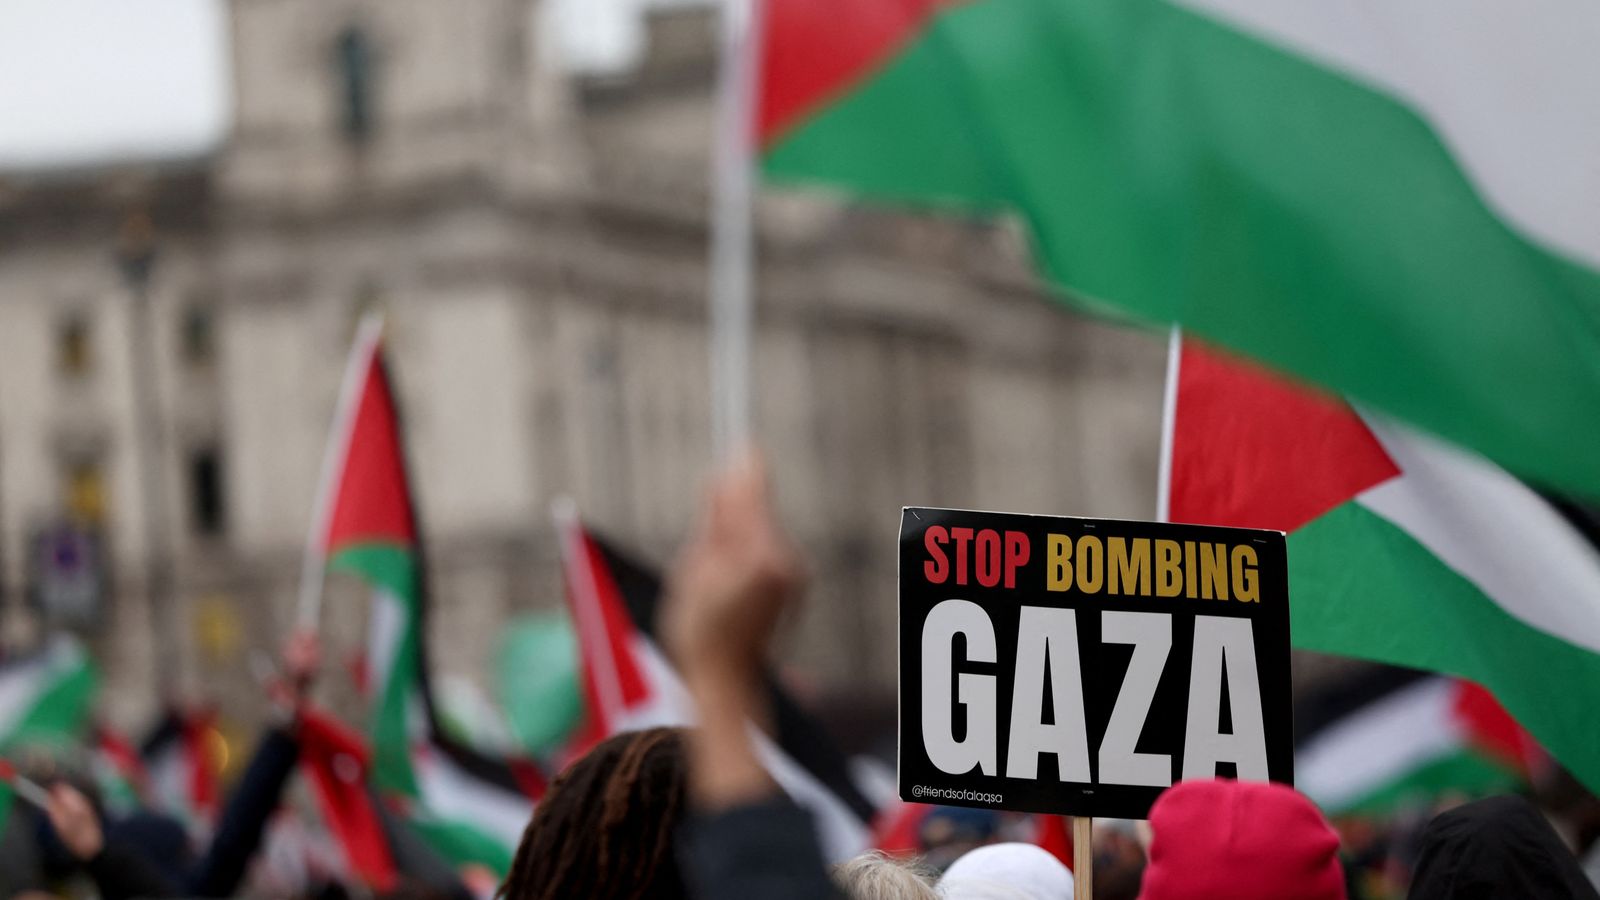 Jewish people 'terrified to leave homes' during pro-Palestinian marches, says Jeremy Hunt